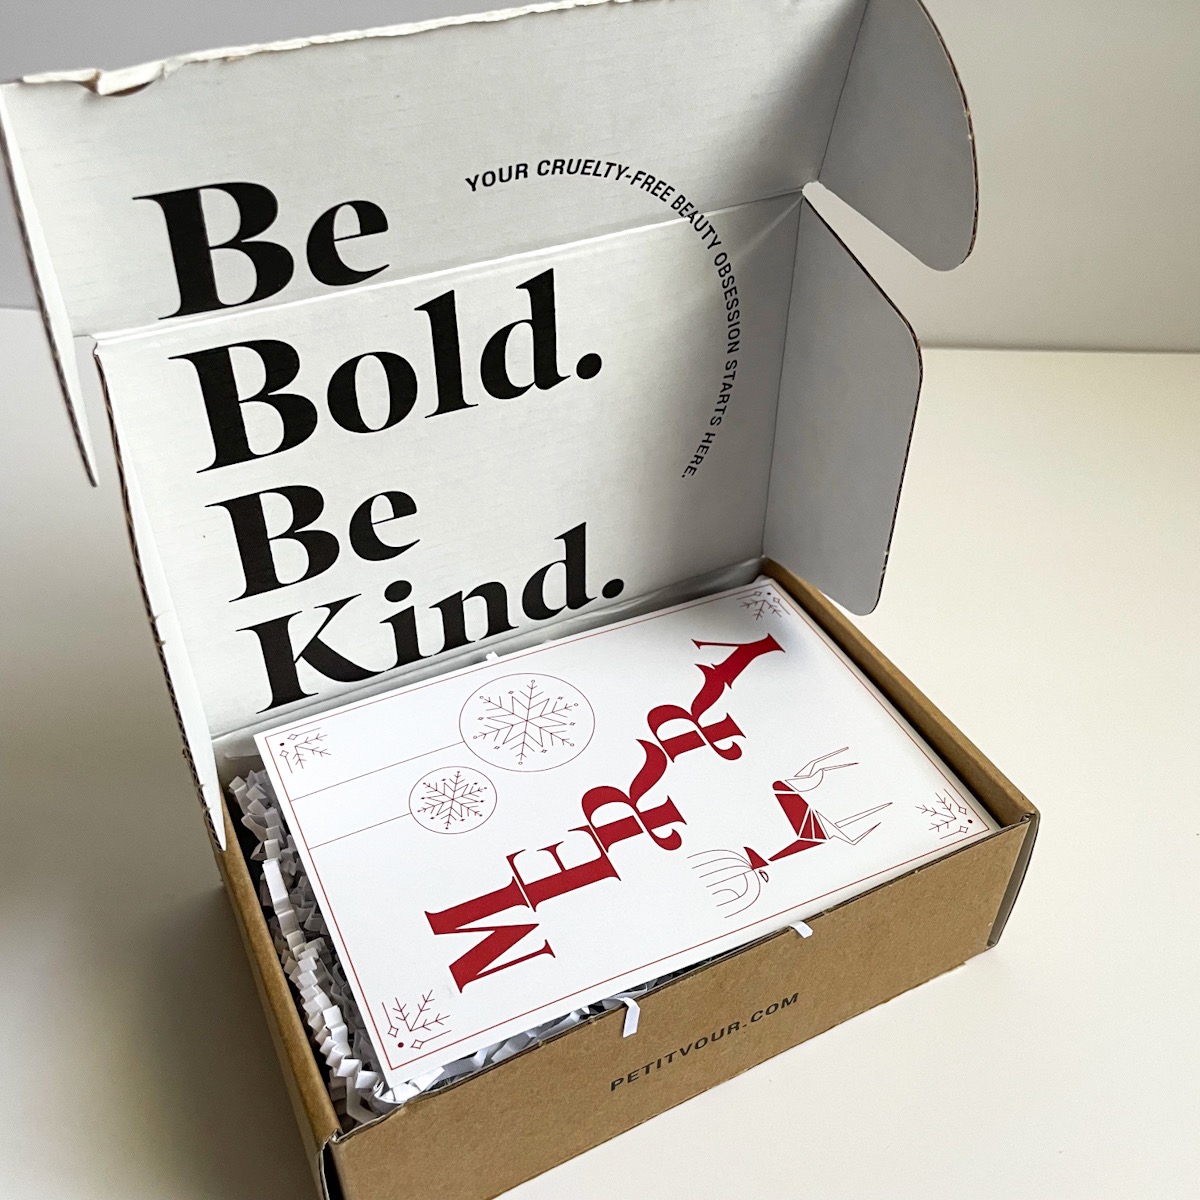 opened brown box with be bold be kind printed on lid